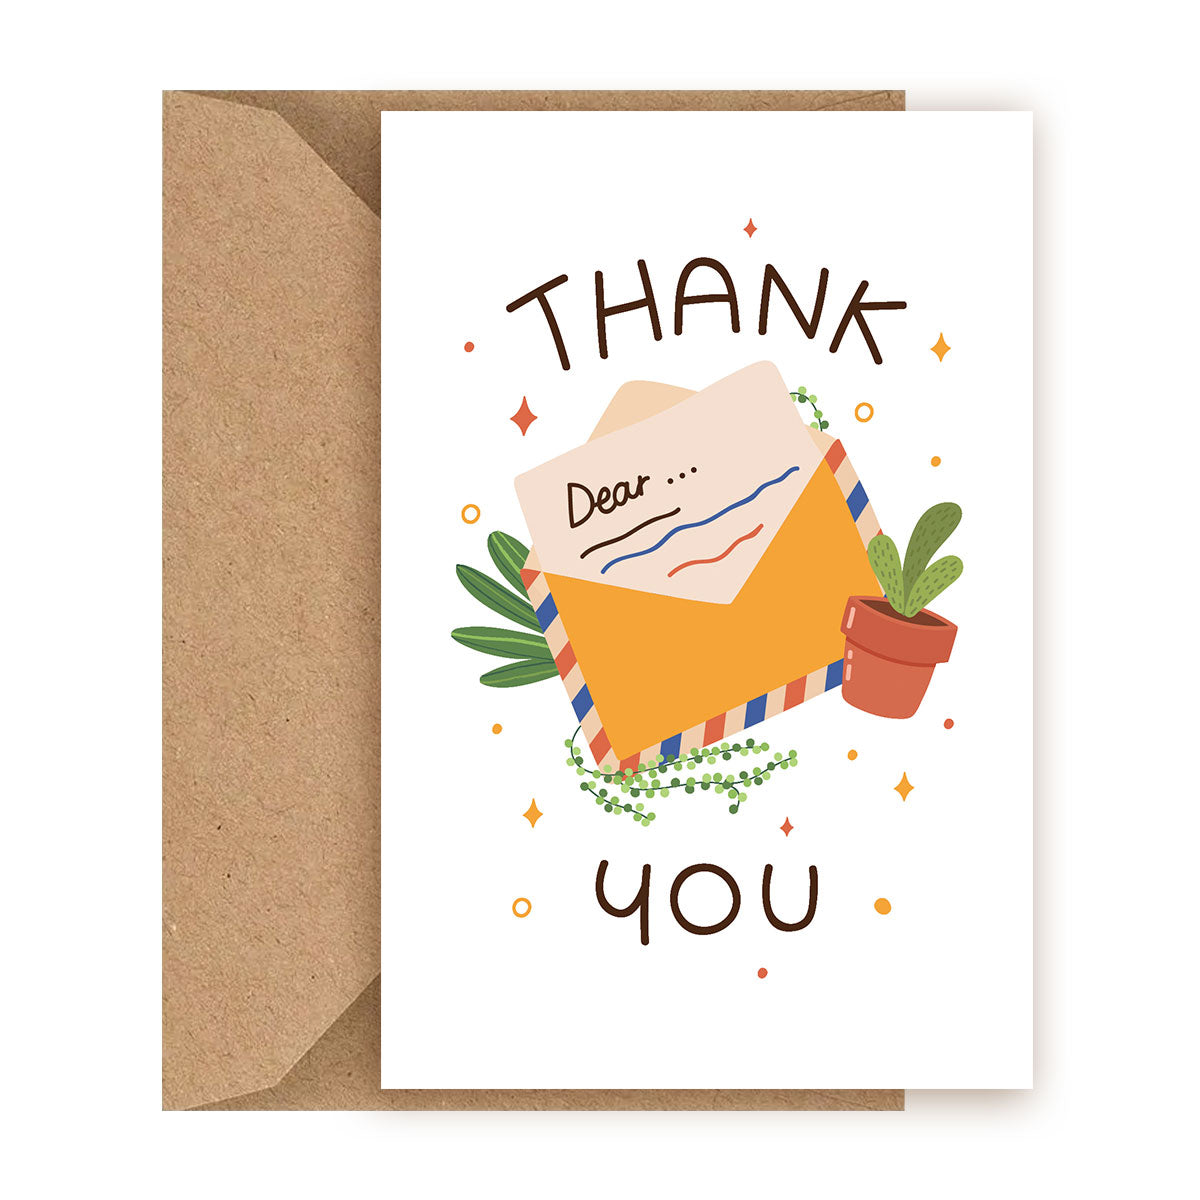 Succulent Thank You Card for sale, Succulent Card for sale, Cactus Greeting Card, Succulents Greeting Card, Succulents Gift Ideas, Thank you card for employee, Employee Appreciation Cards for sale, Corporate succulent gift with thank you card, Thank You Live Succulent Gift Box for sale, Succulent thank you cards with kraft envelope, Succulent thank you cards to suit any occasion, Staff Appreciation Card ideas, Thank you note to employee for a job well done, Thank you card for employee appreciation